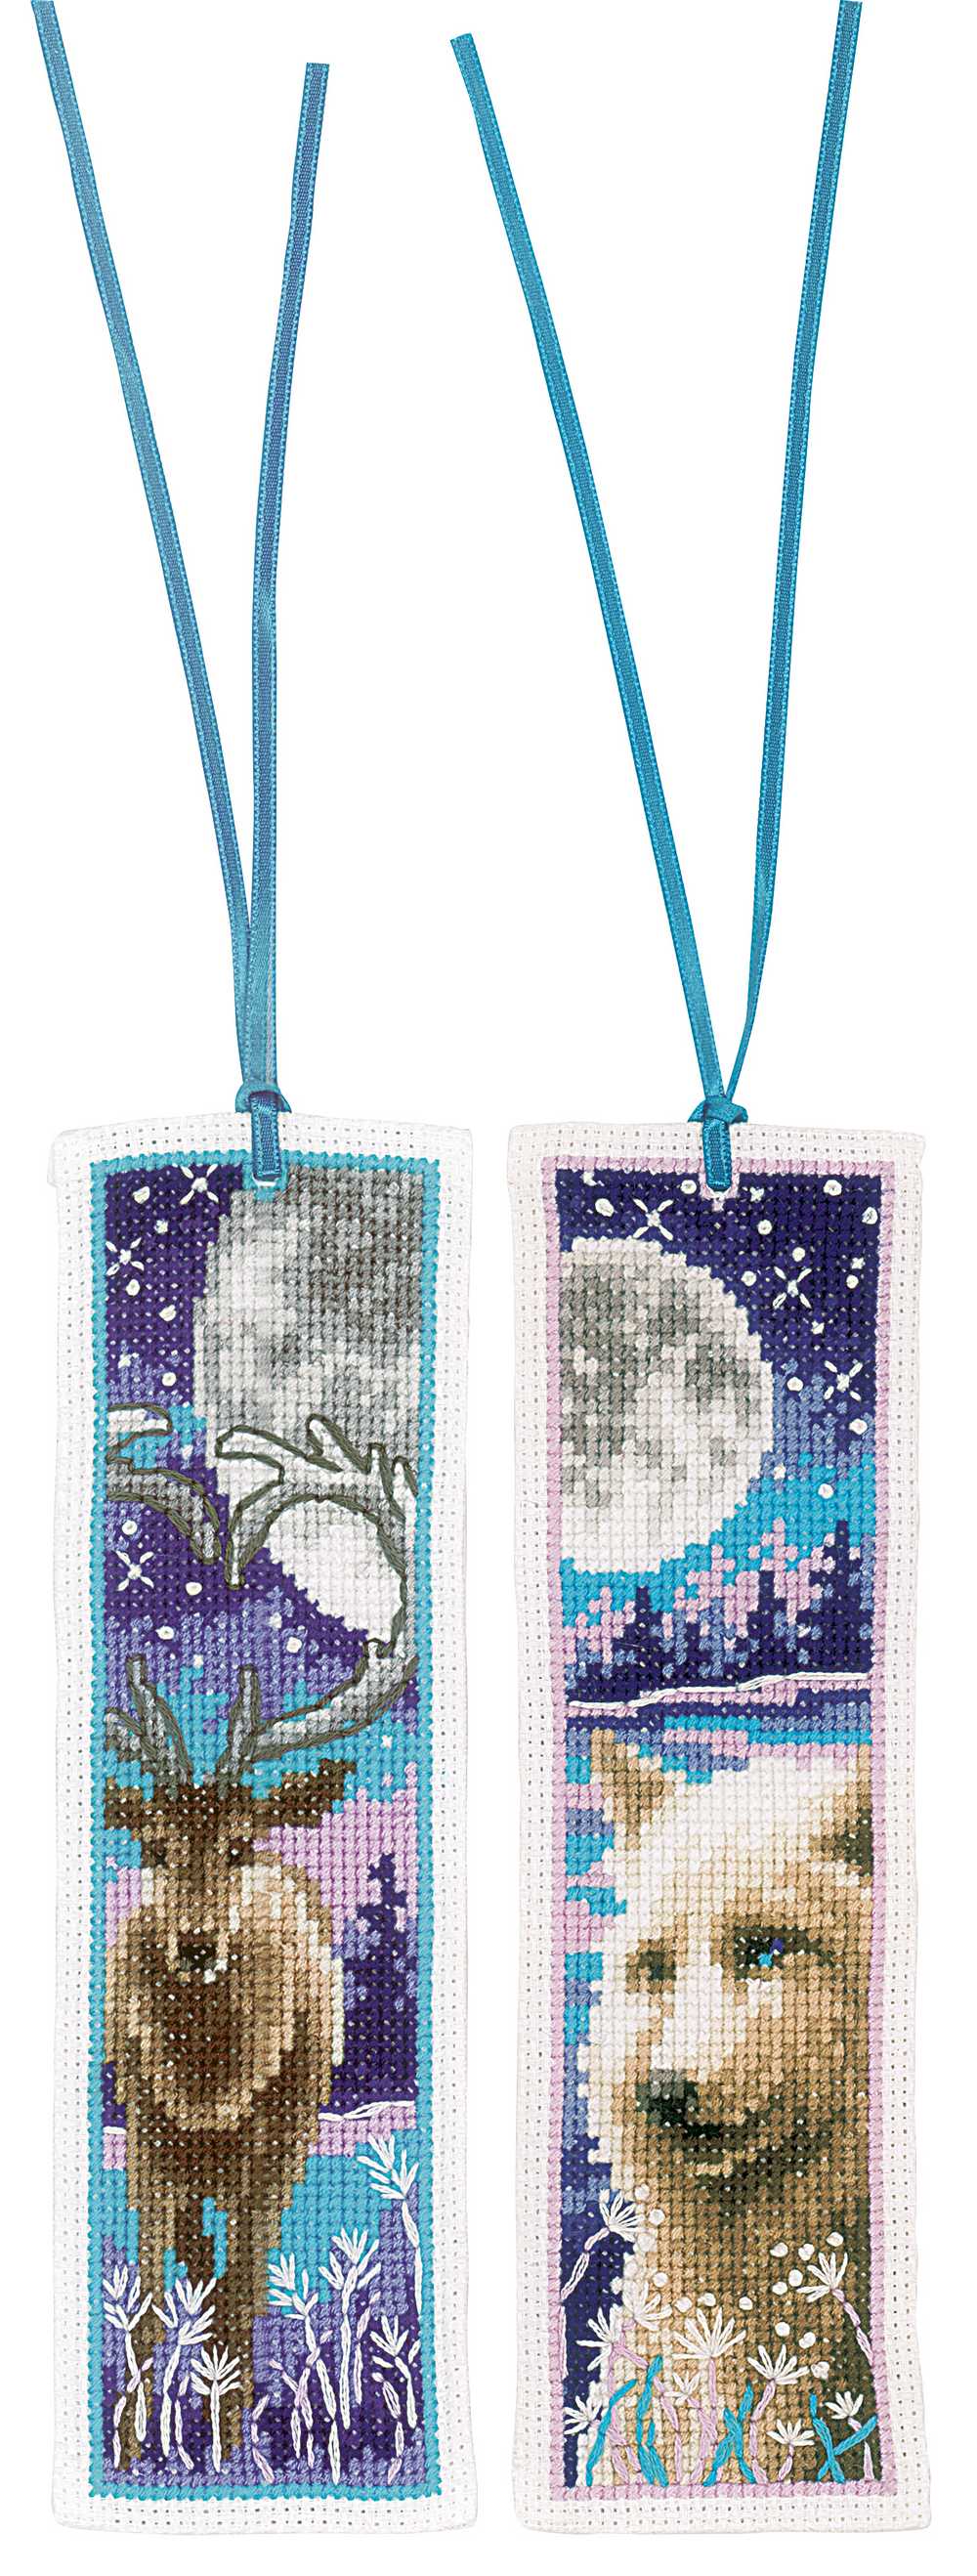 Vervaco Cross Stitch Kit - Wolf and Deer with Moon Bookmarks Set of 2